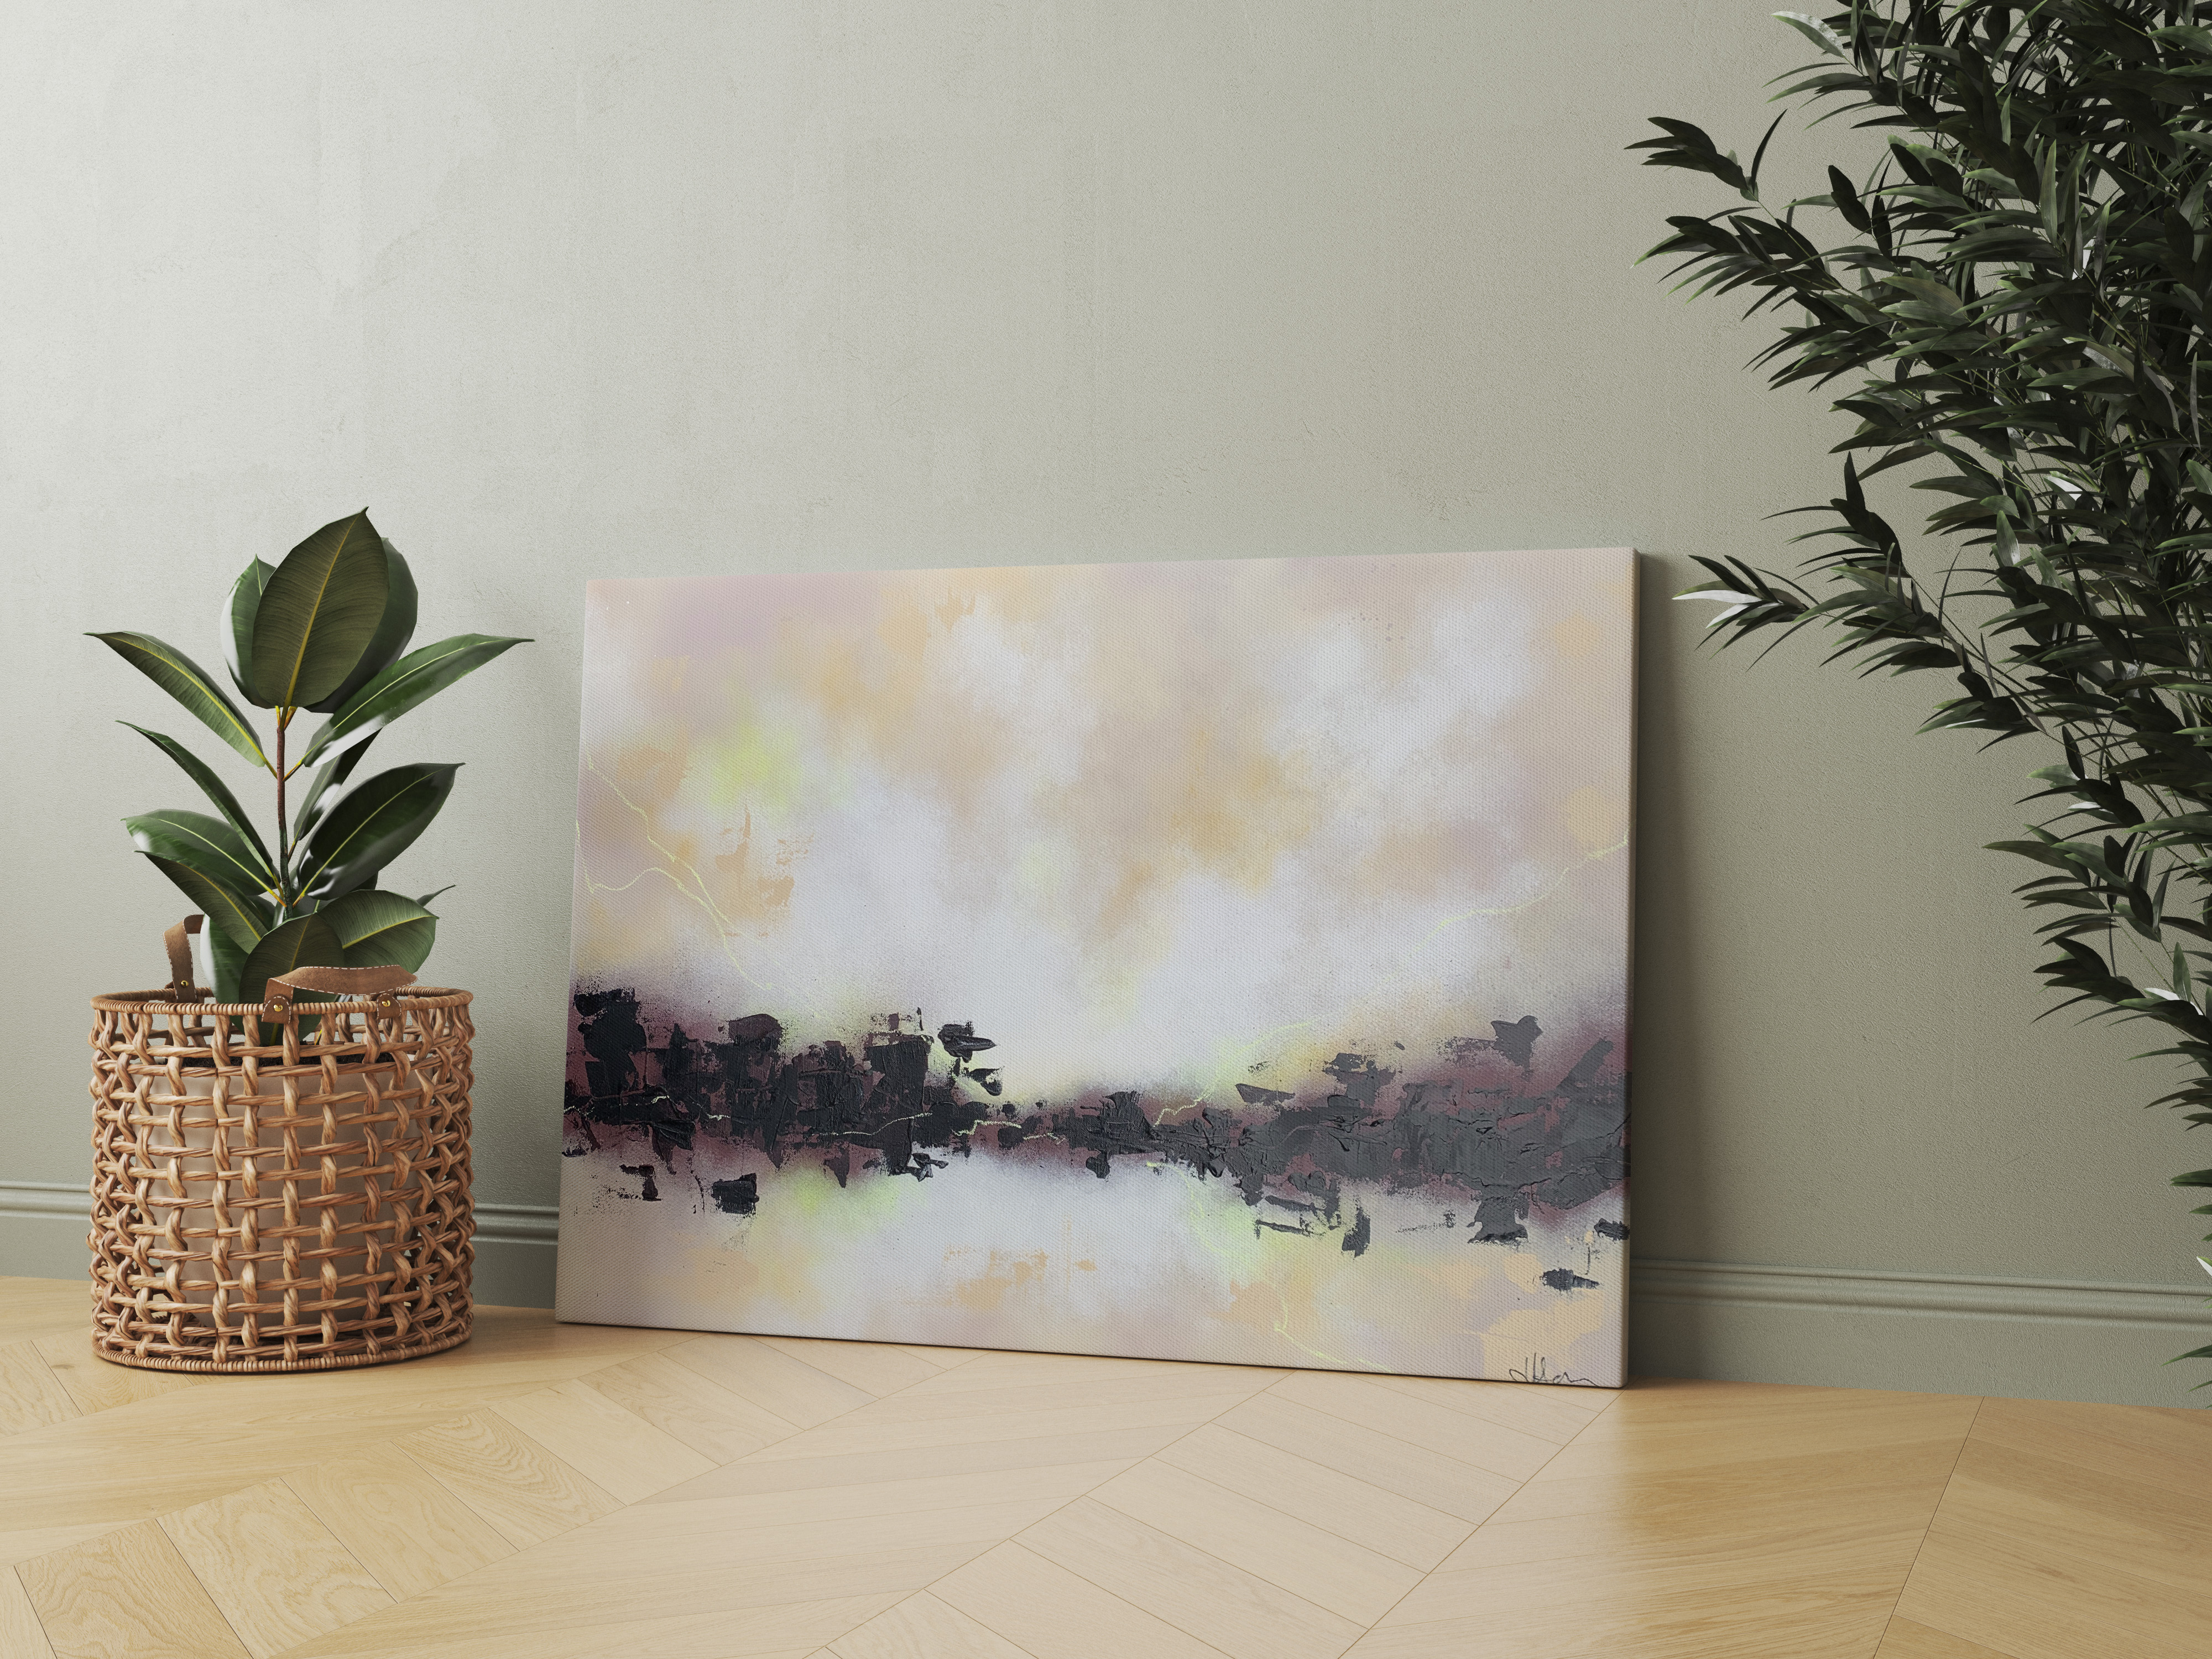 Original abstract art - contemporary Irish landscape canvas painting for sale. Large pink, purple and beige acrylic painting.